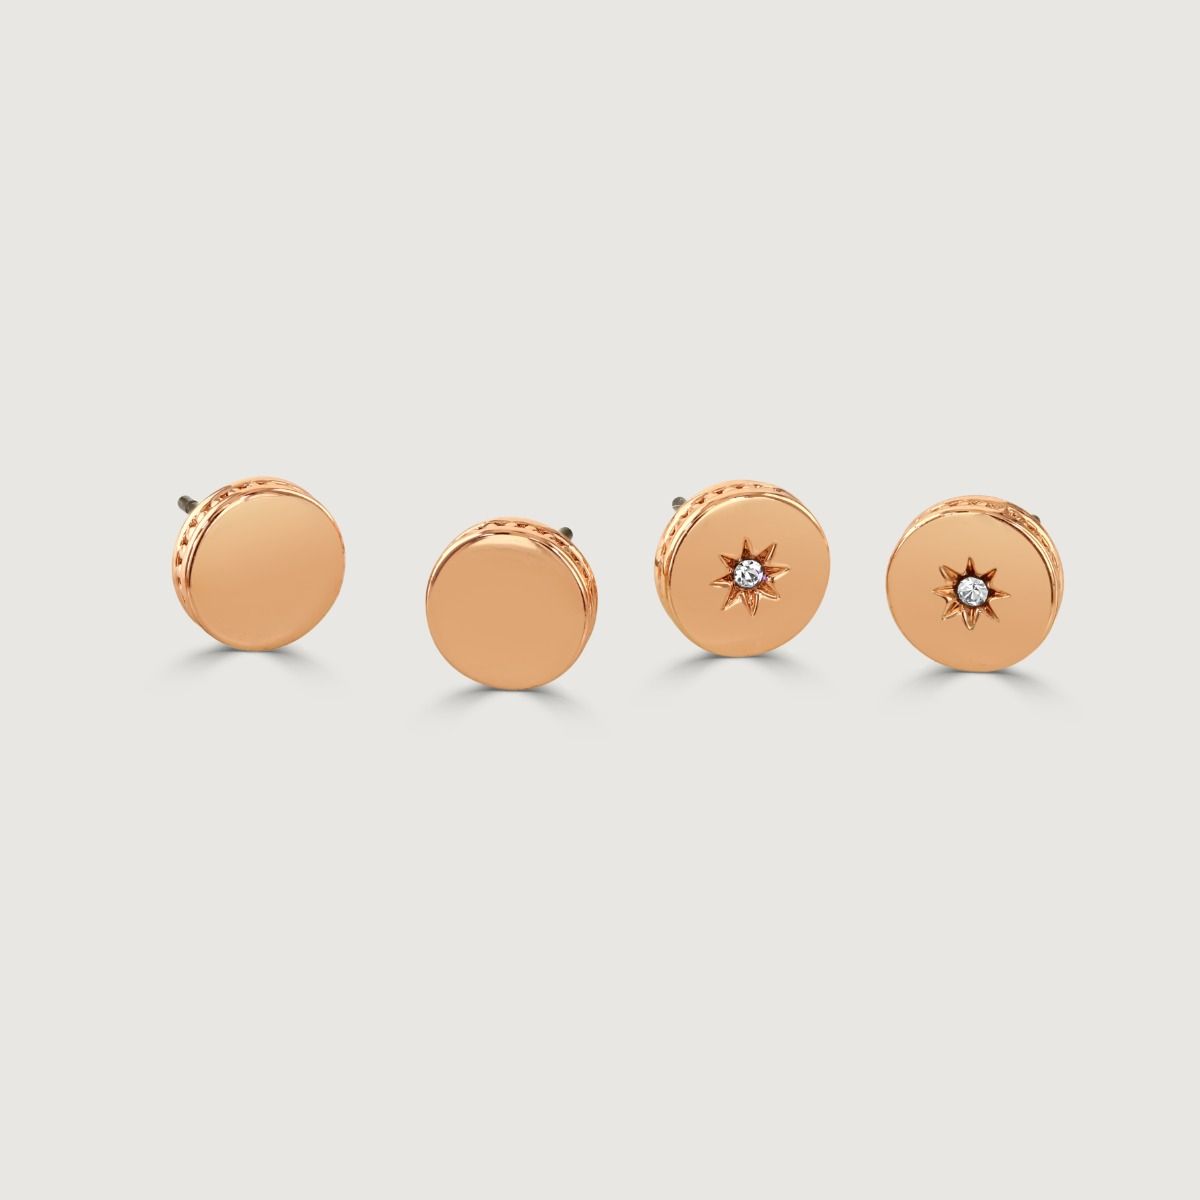 The Polished Set of Two Rose Gold Stud Earrings is a versatile and stylish accessory. Crafted with precision and care, these earrings feature a polished rose gold finish that exudes sophistication. With two different designs in the set, they offer versati